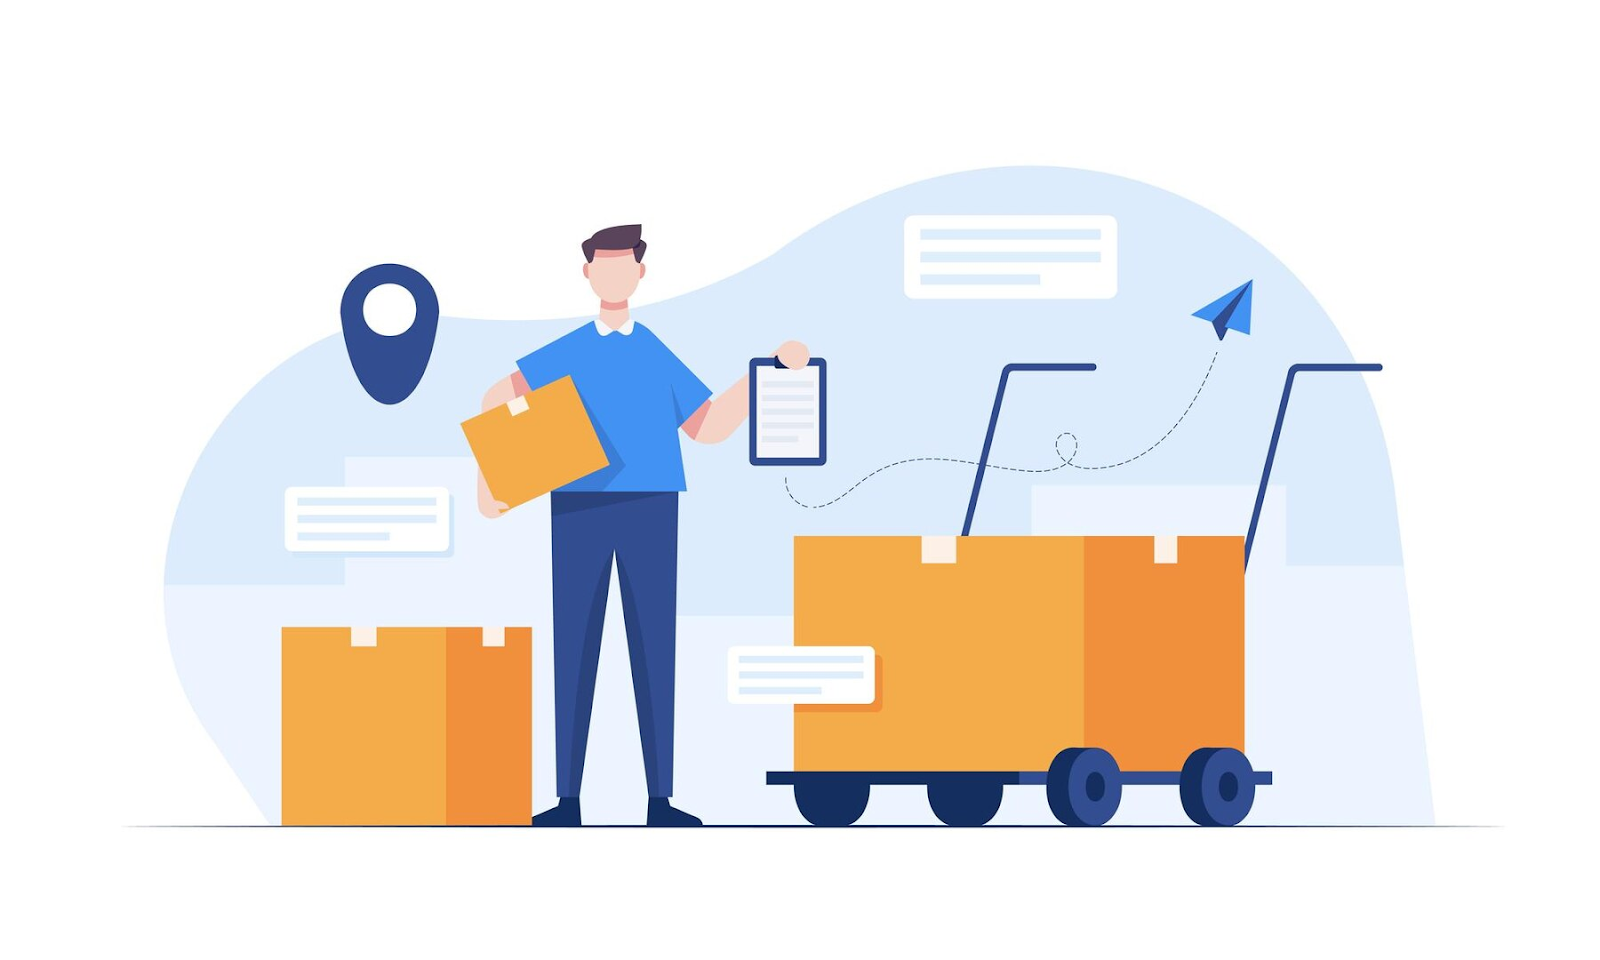 Orders and shipping management apps